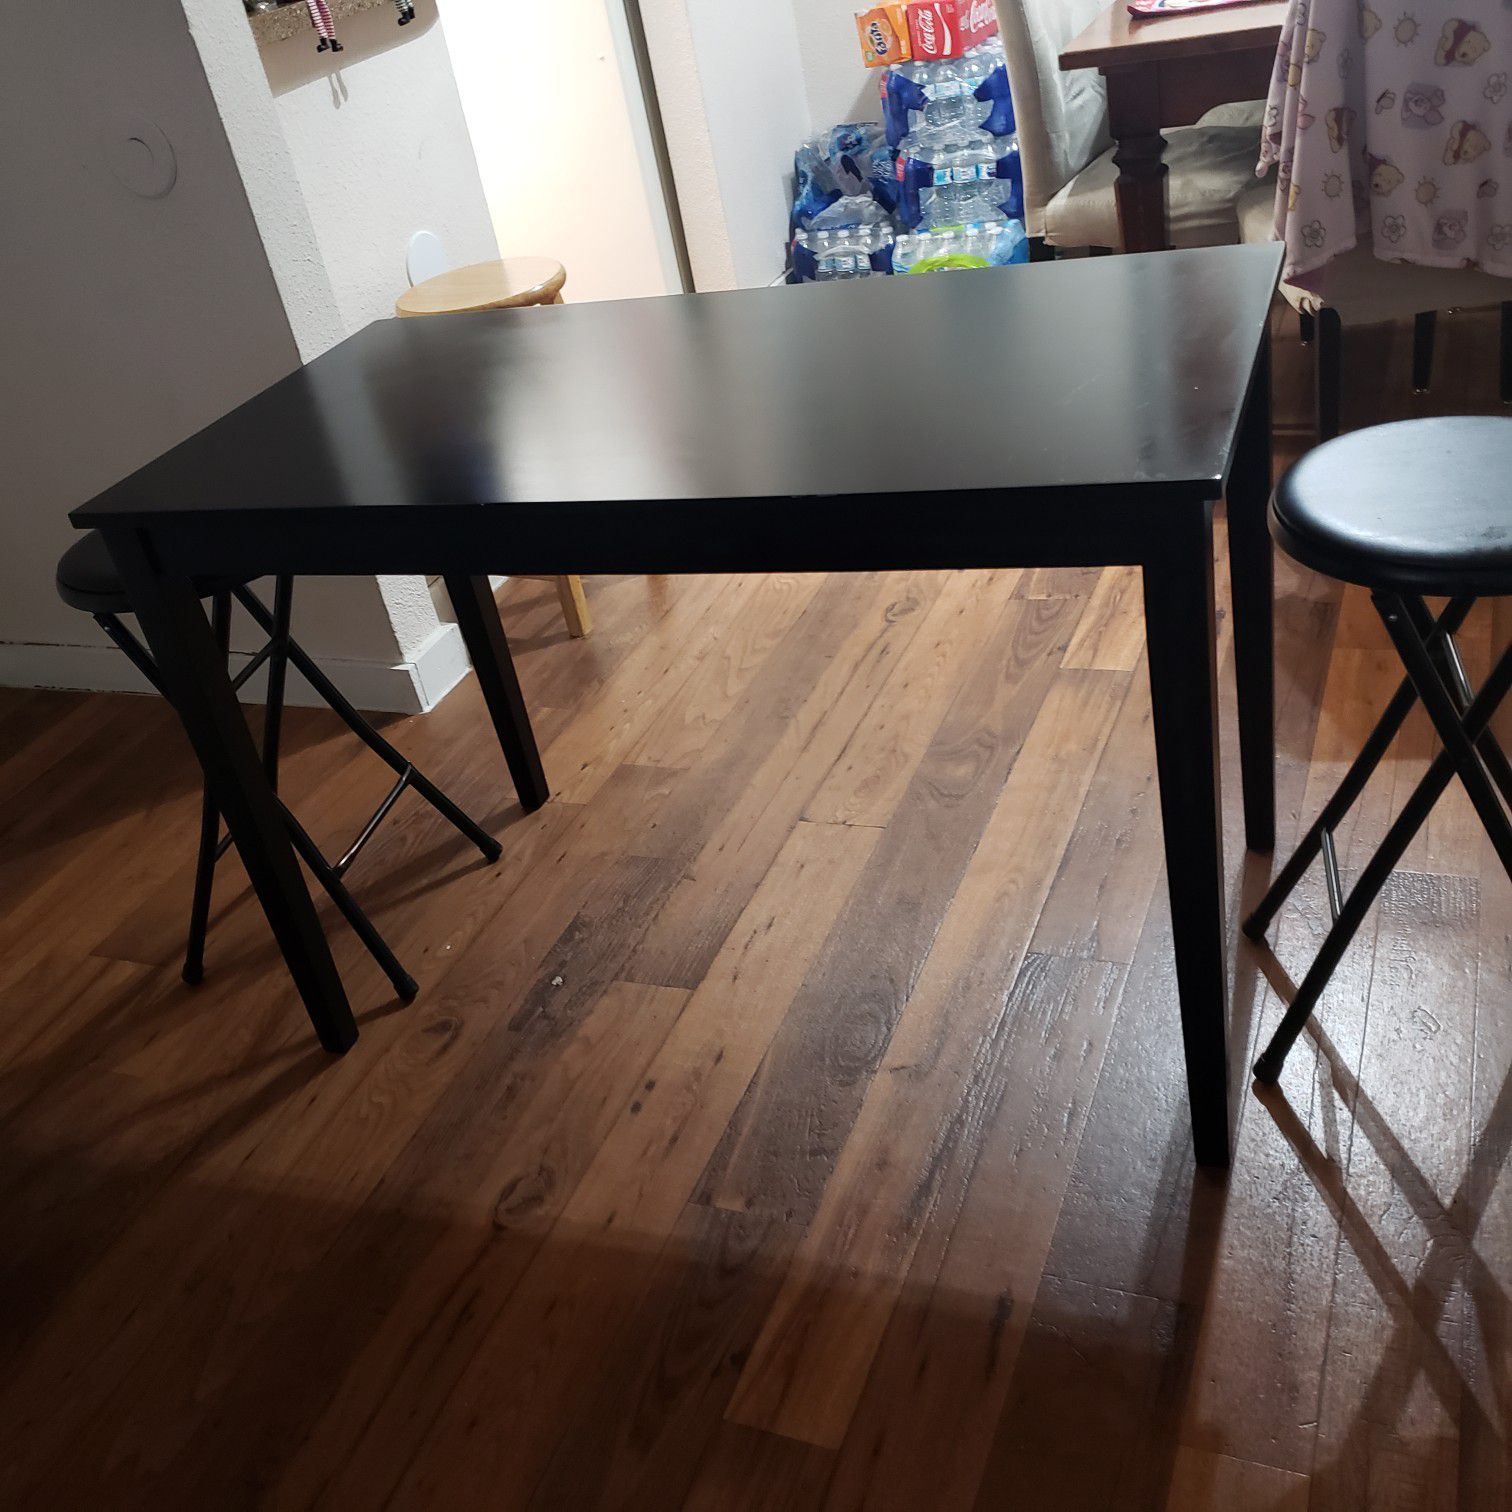 Table with 2 stools